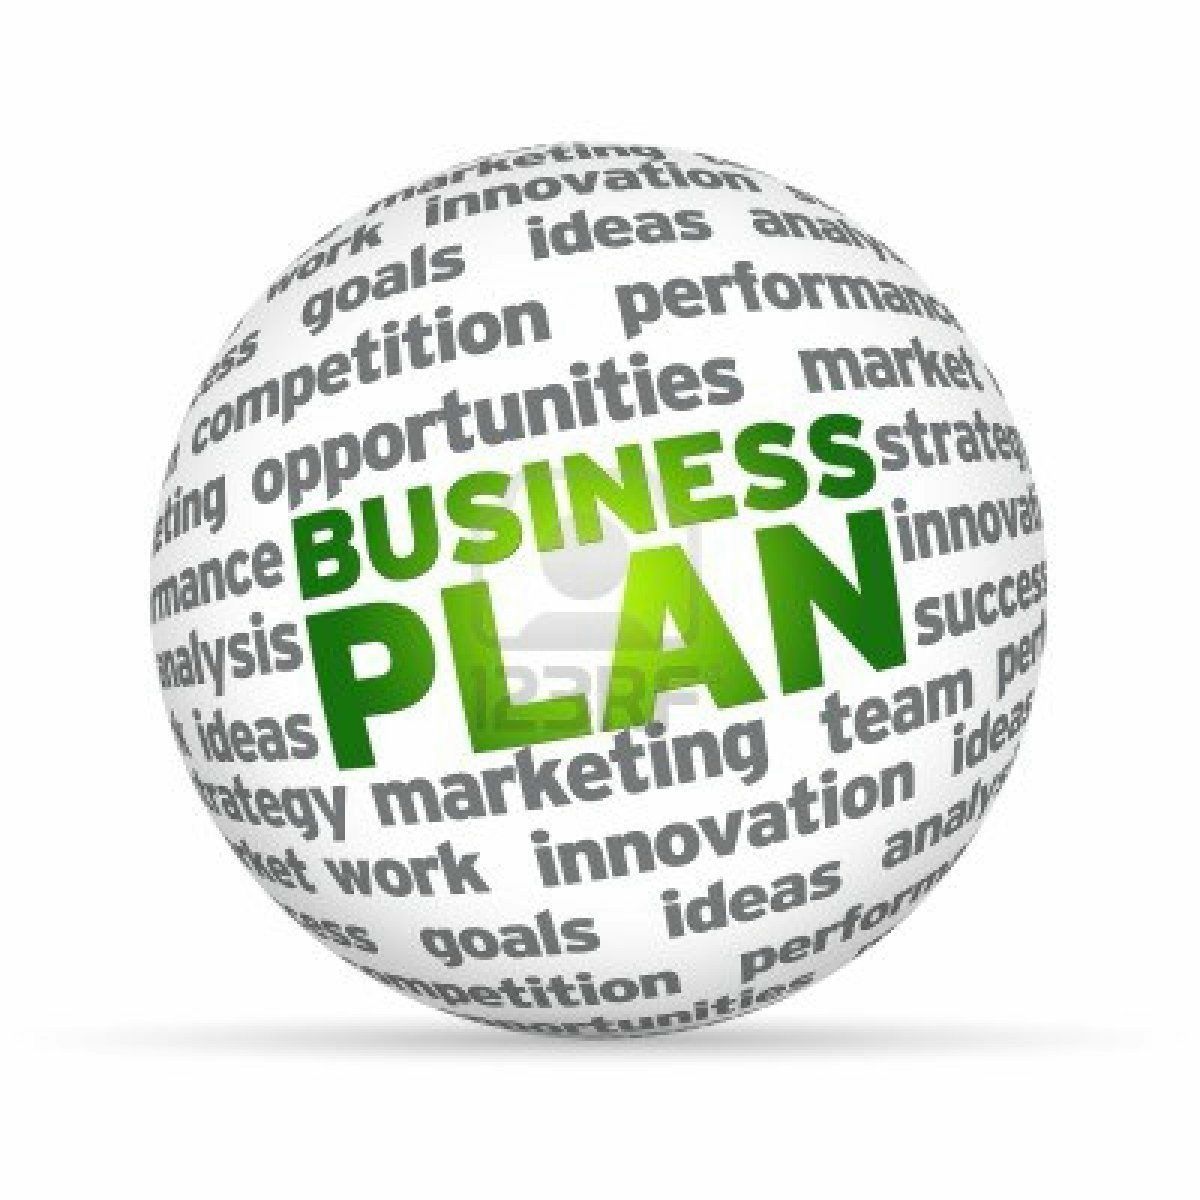 Creating Down Business Objectives 3